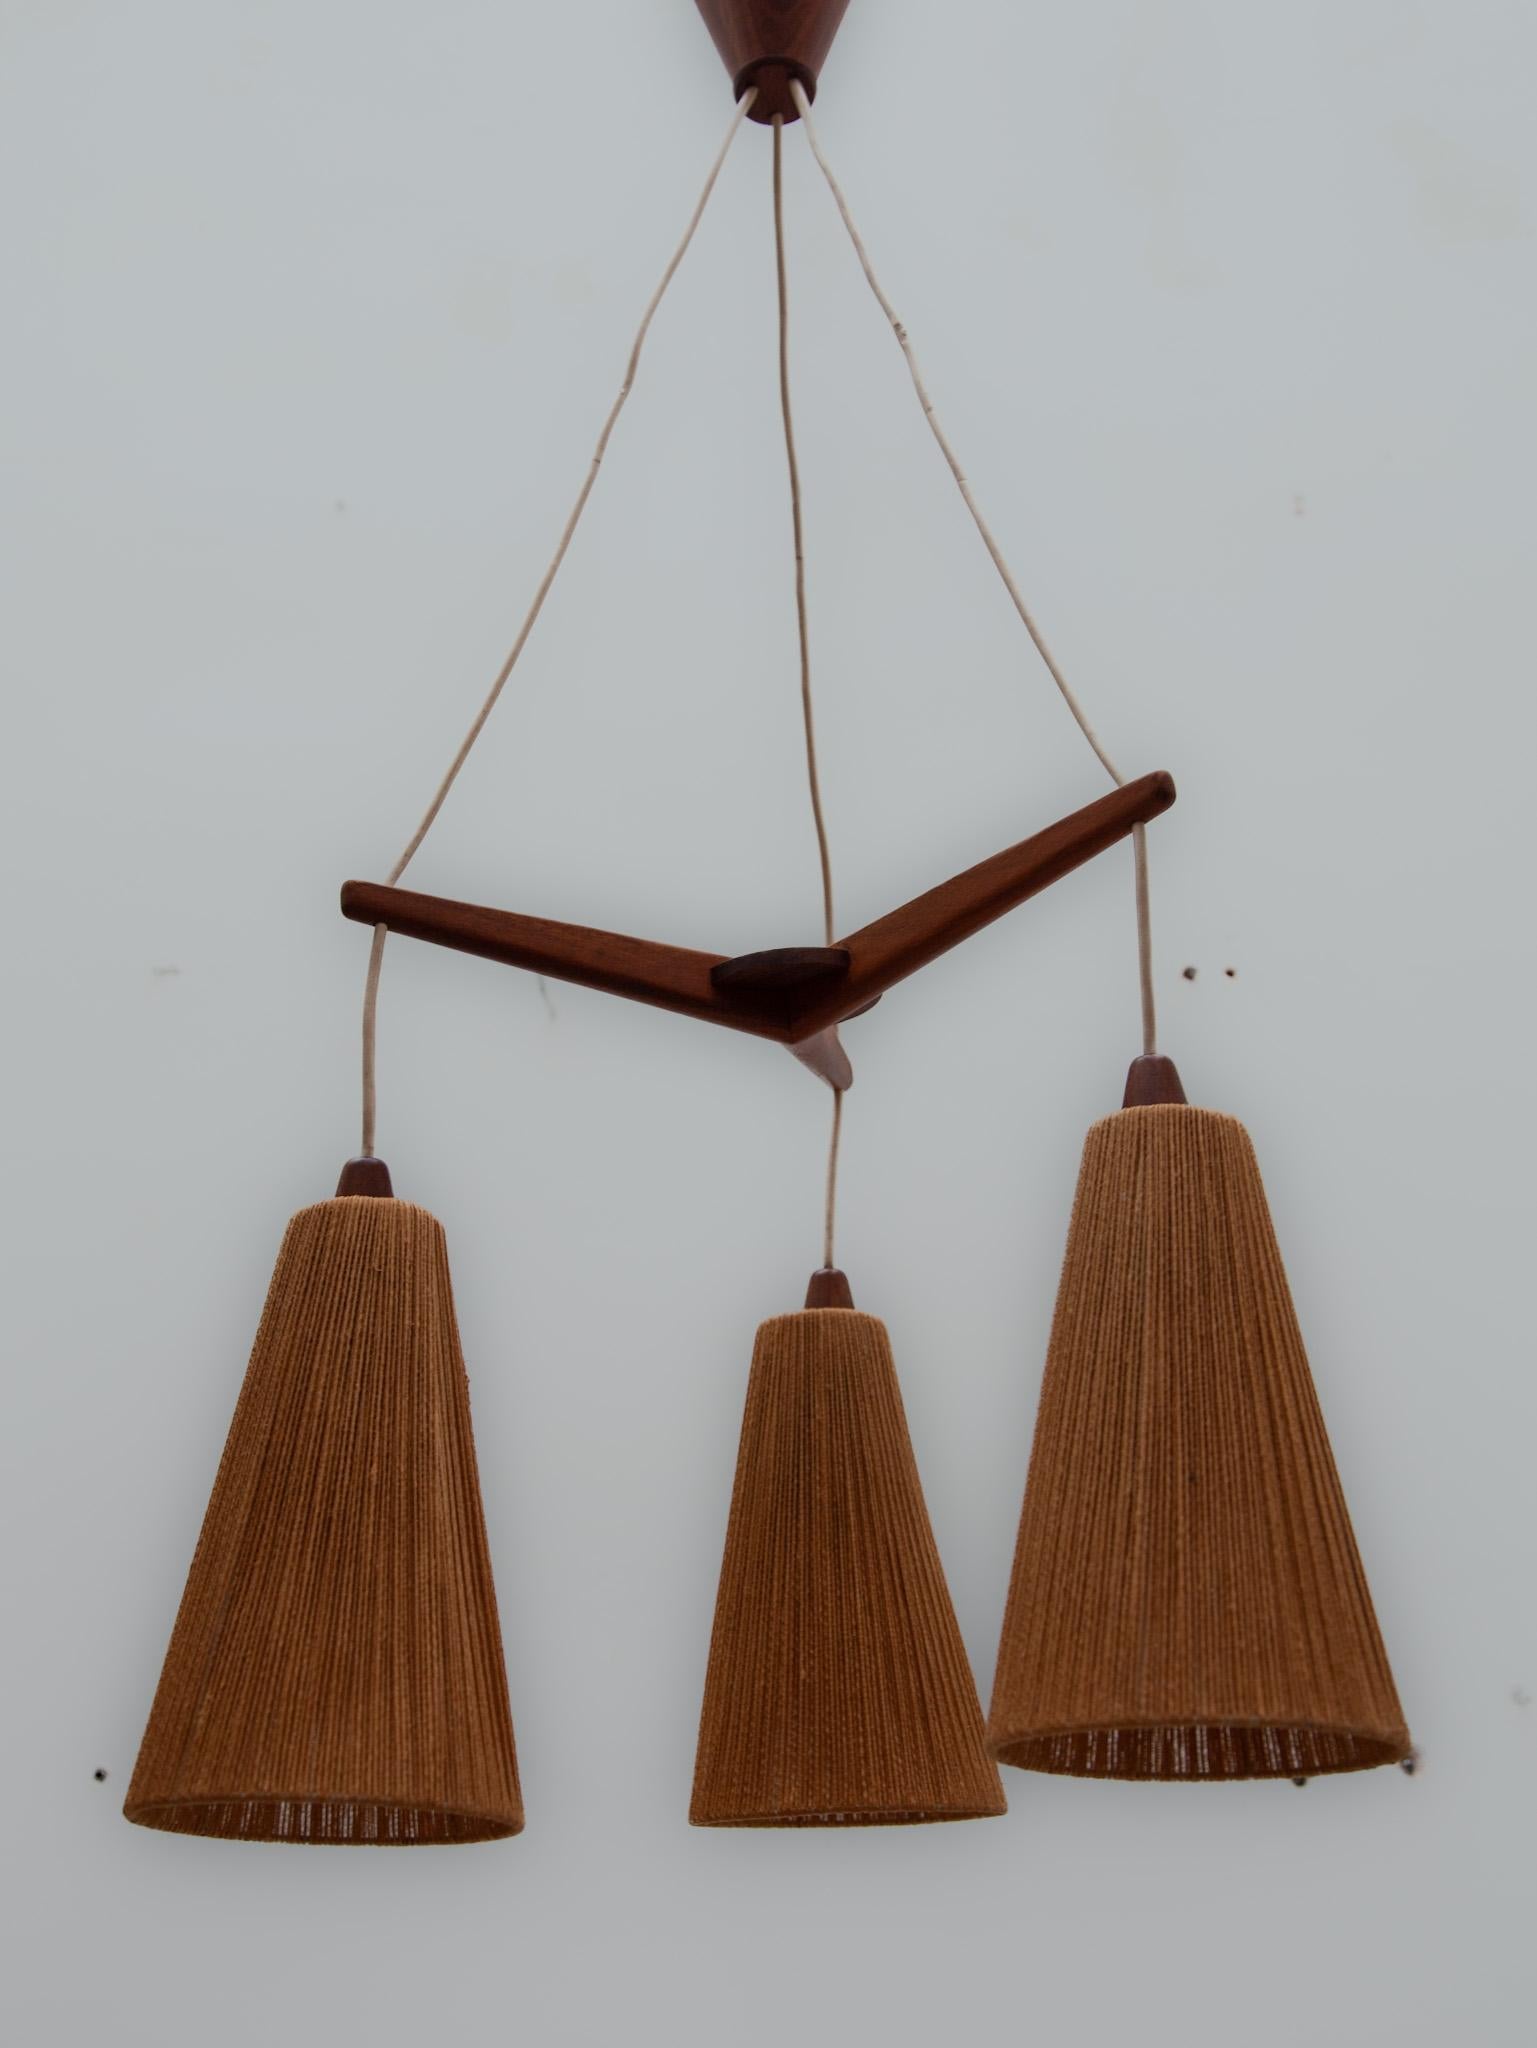 Teak and Jute Cord Pendant Cascade Lamp by Temde, Germany, 1960s For Sale 1